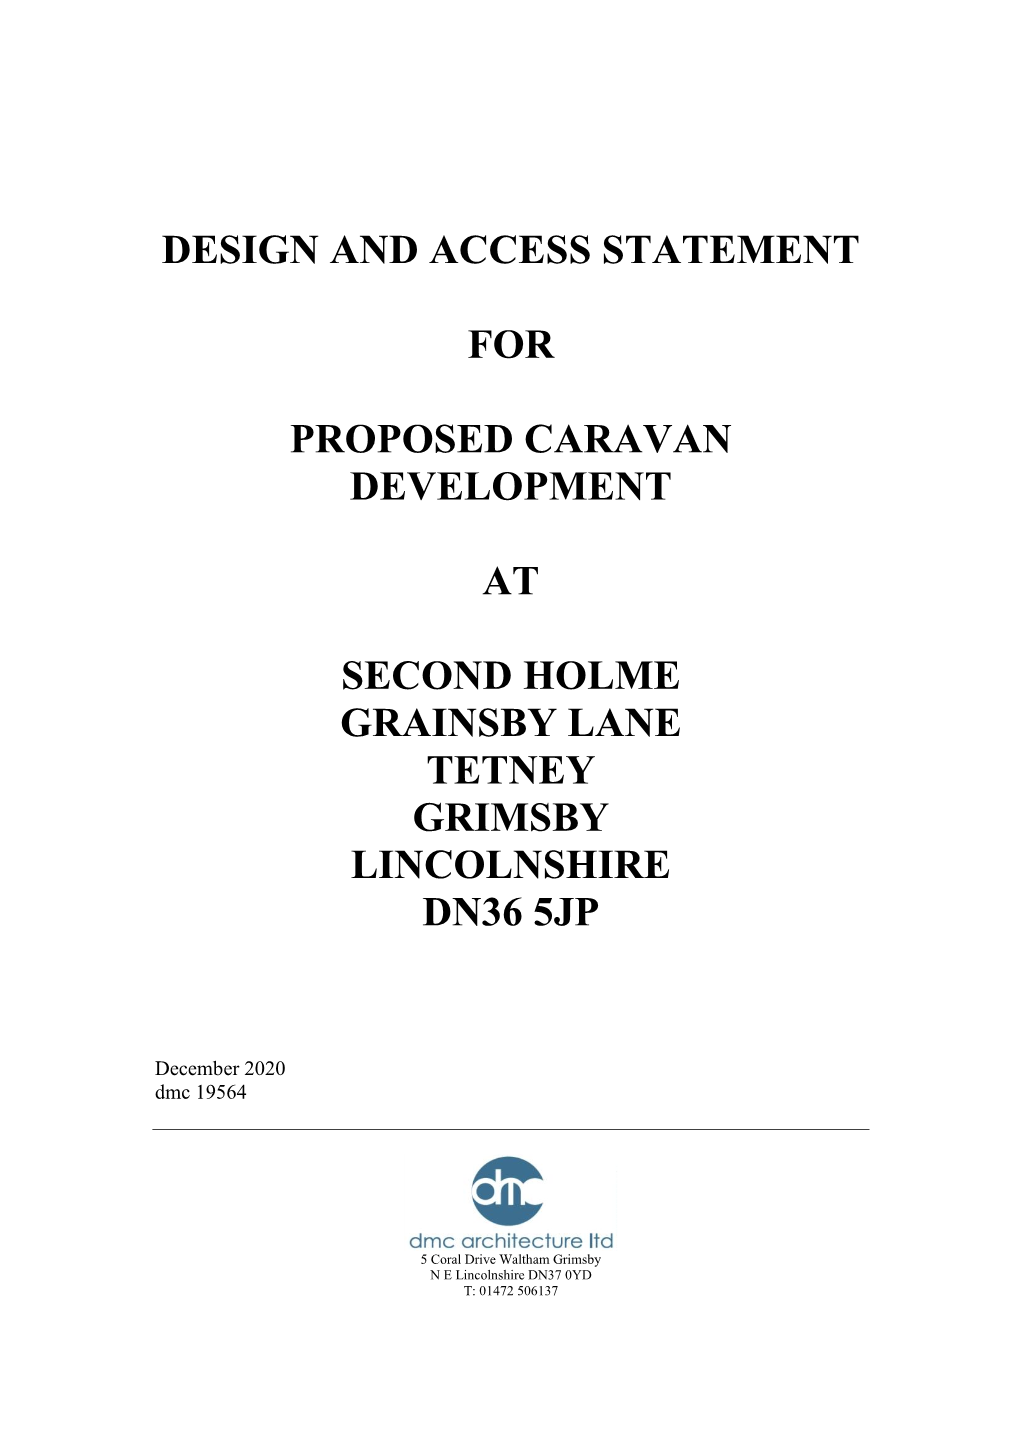 Design and Access Statement for Proposed Caravan